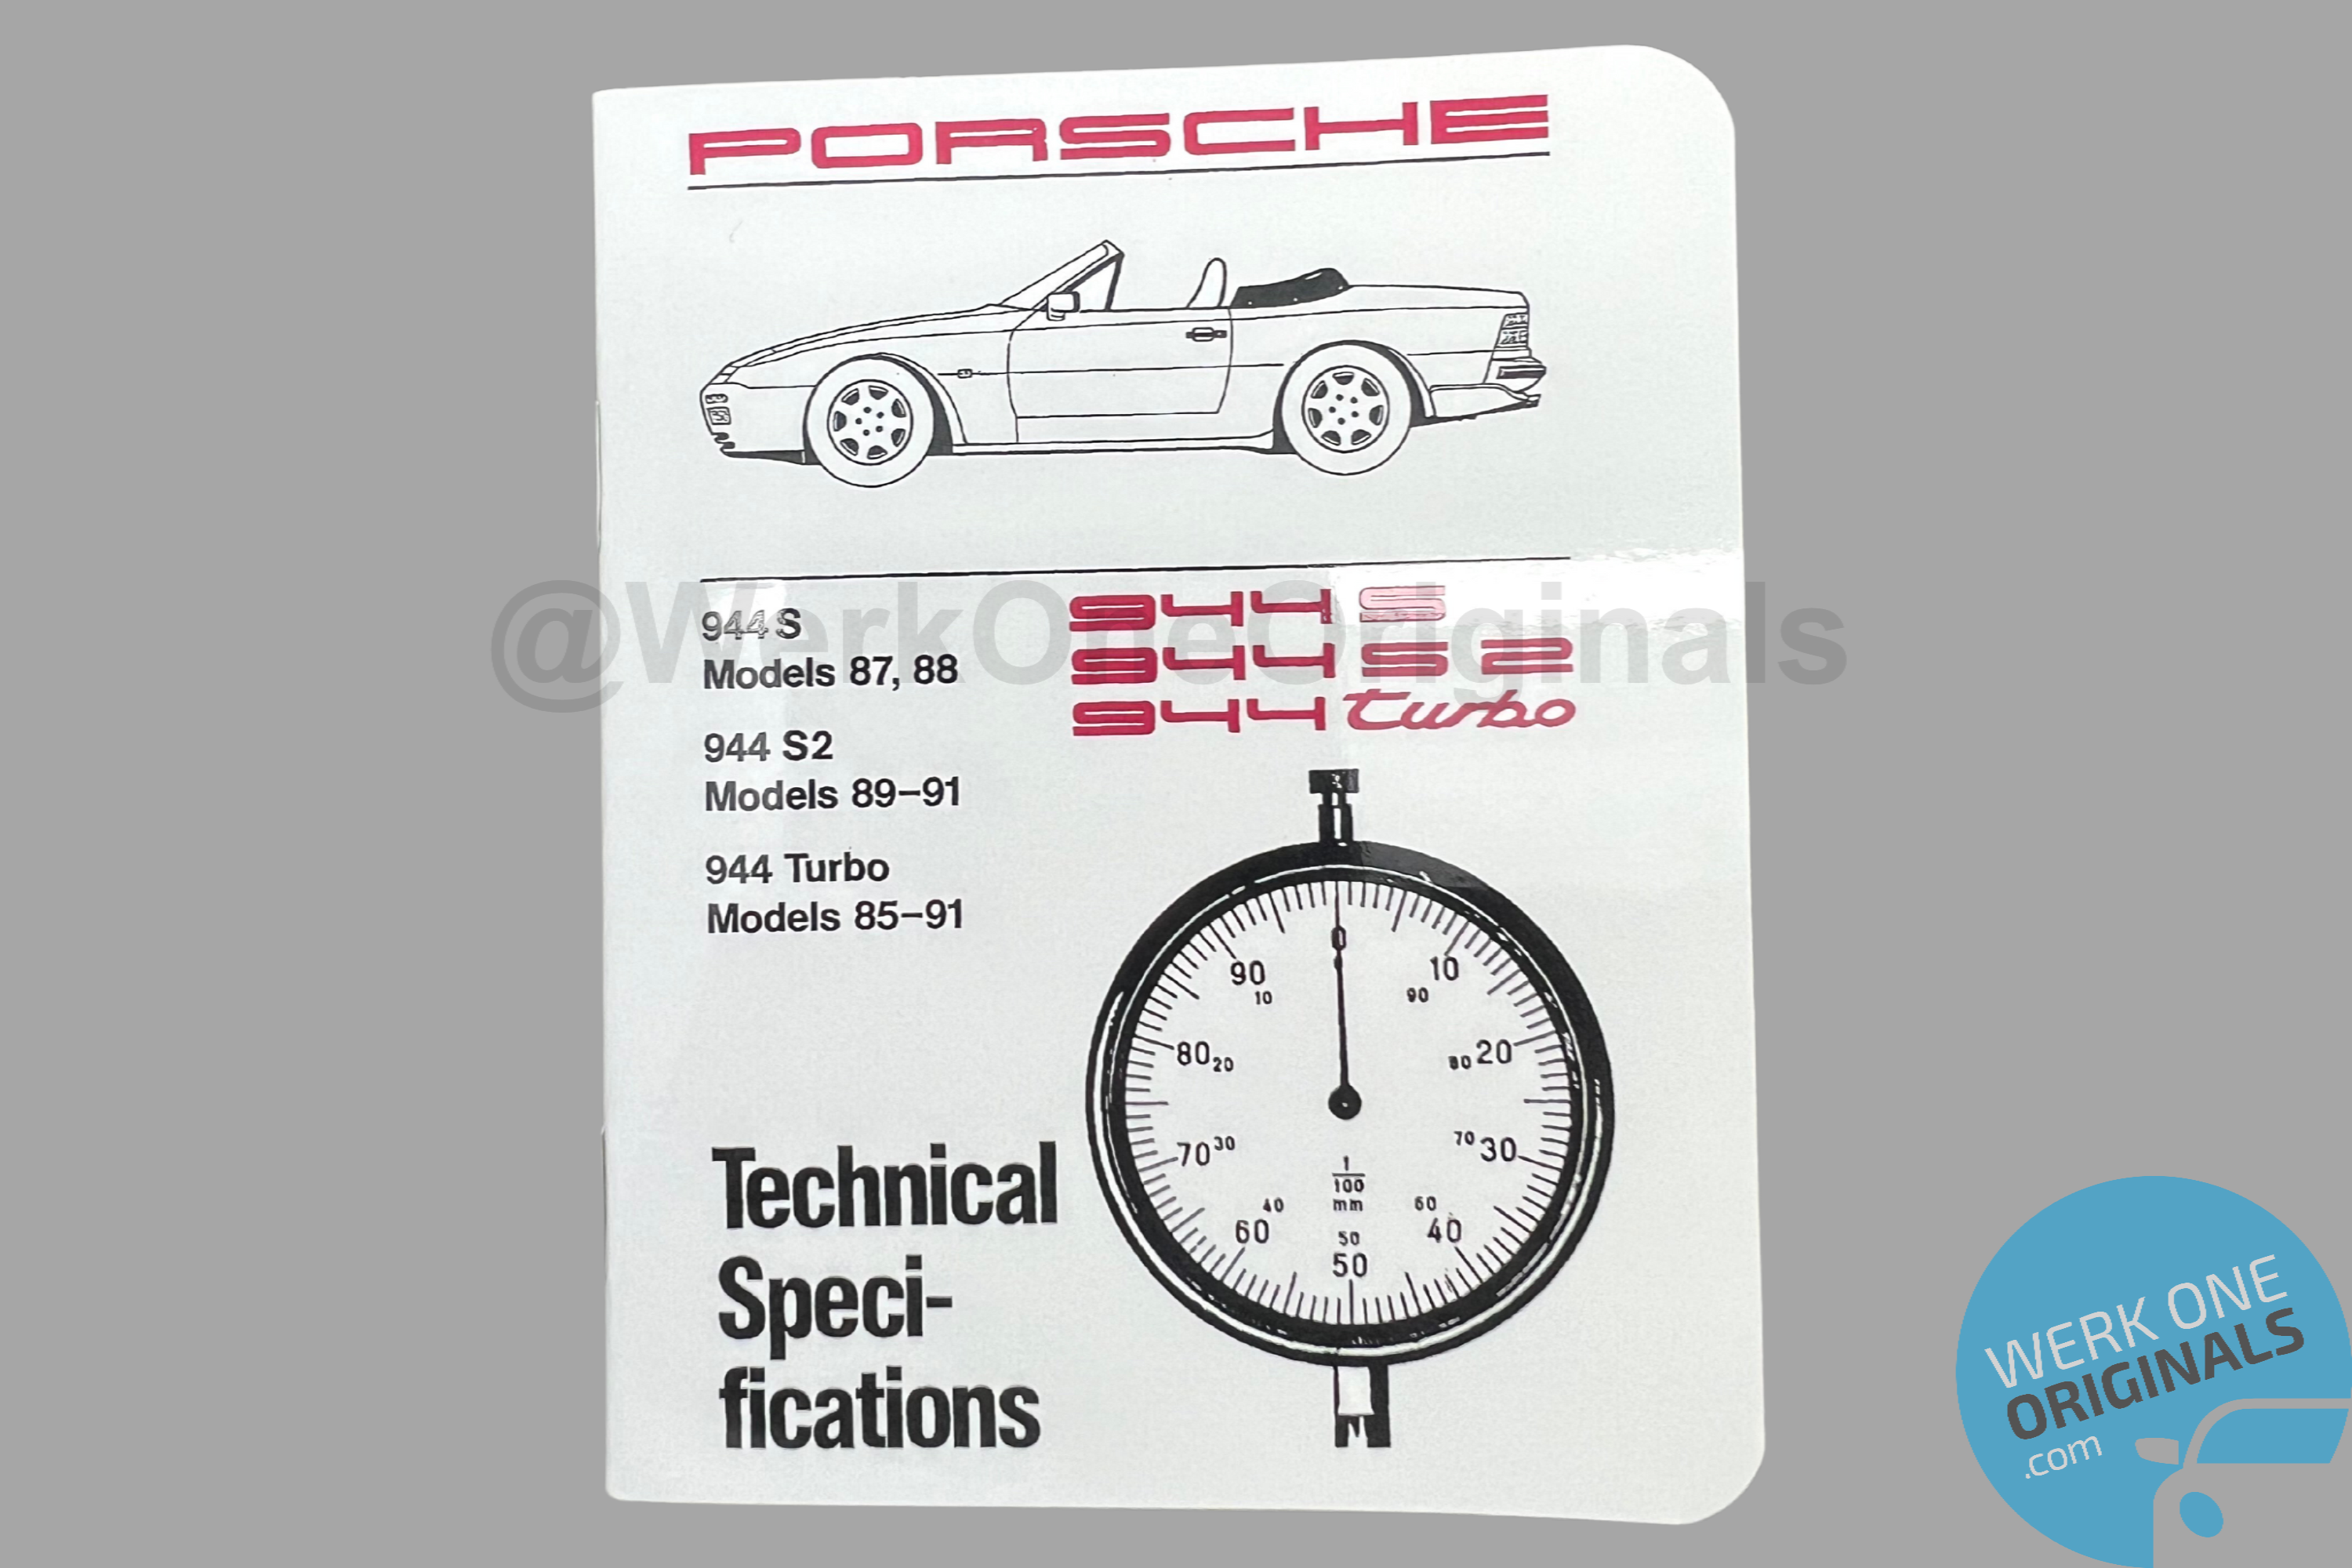 Porsche Technical Specification Manual for 944S, 944S2 & 944 Turbo Models (1985 - 1991)